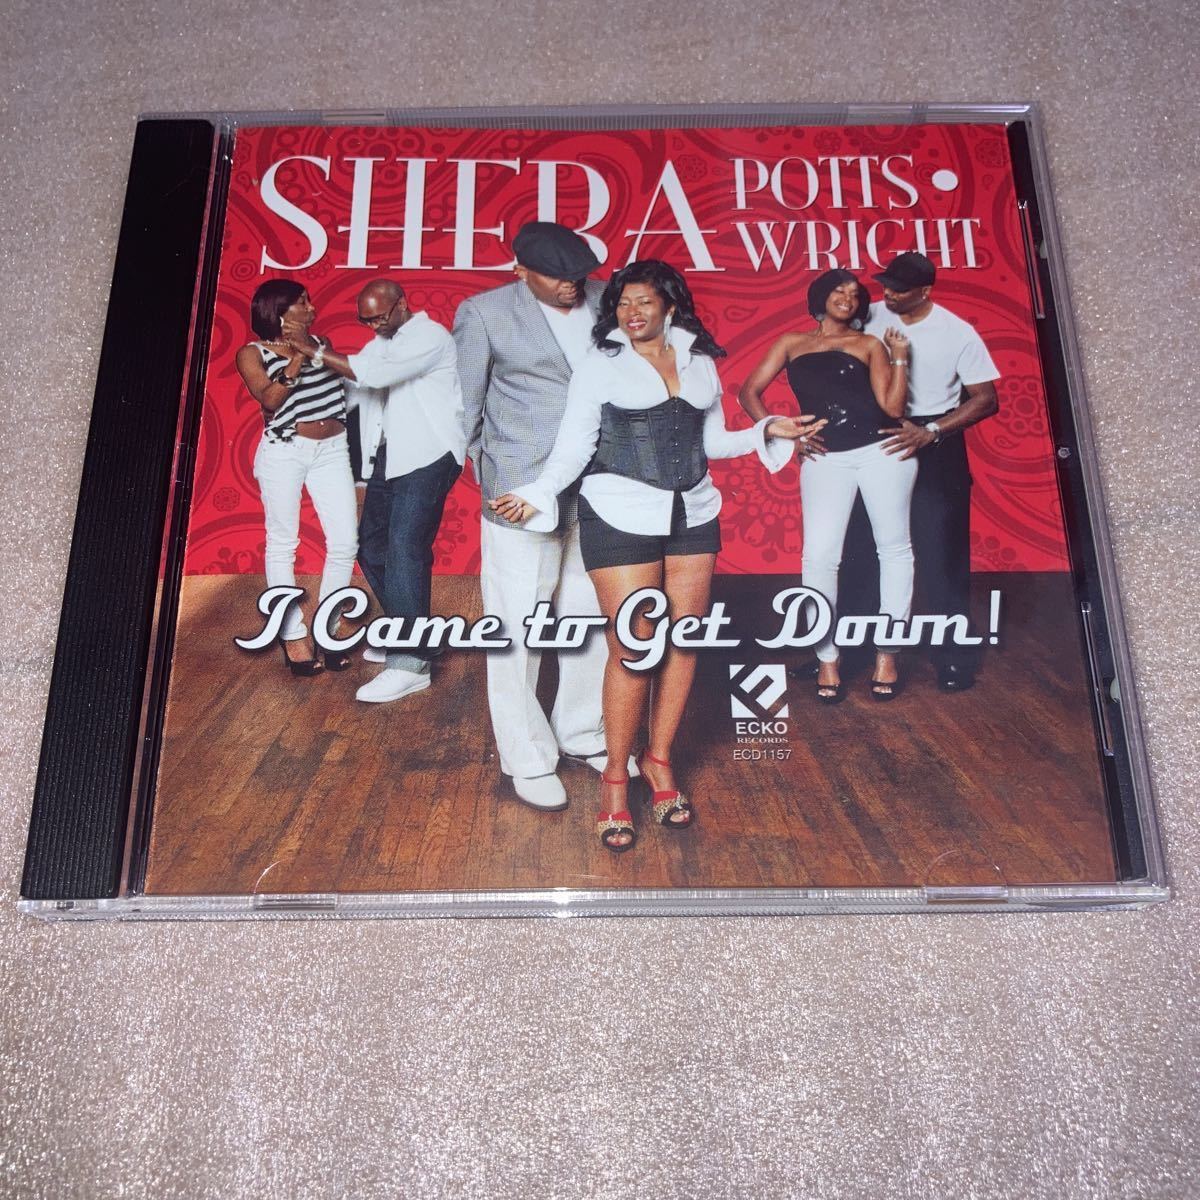 SOUL/R&B/SOUTHERN/SHEBA POTTS-WRIGHT/I Came To Get Down/2014の画像1